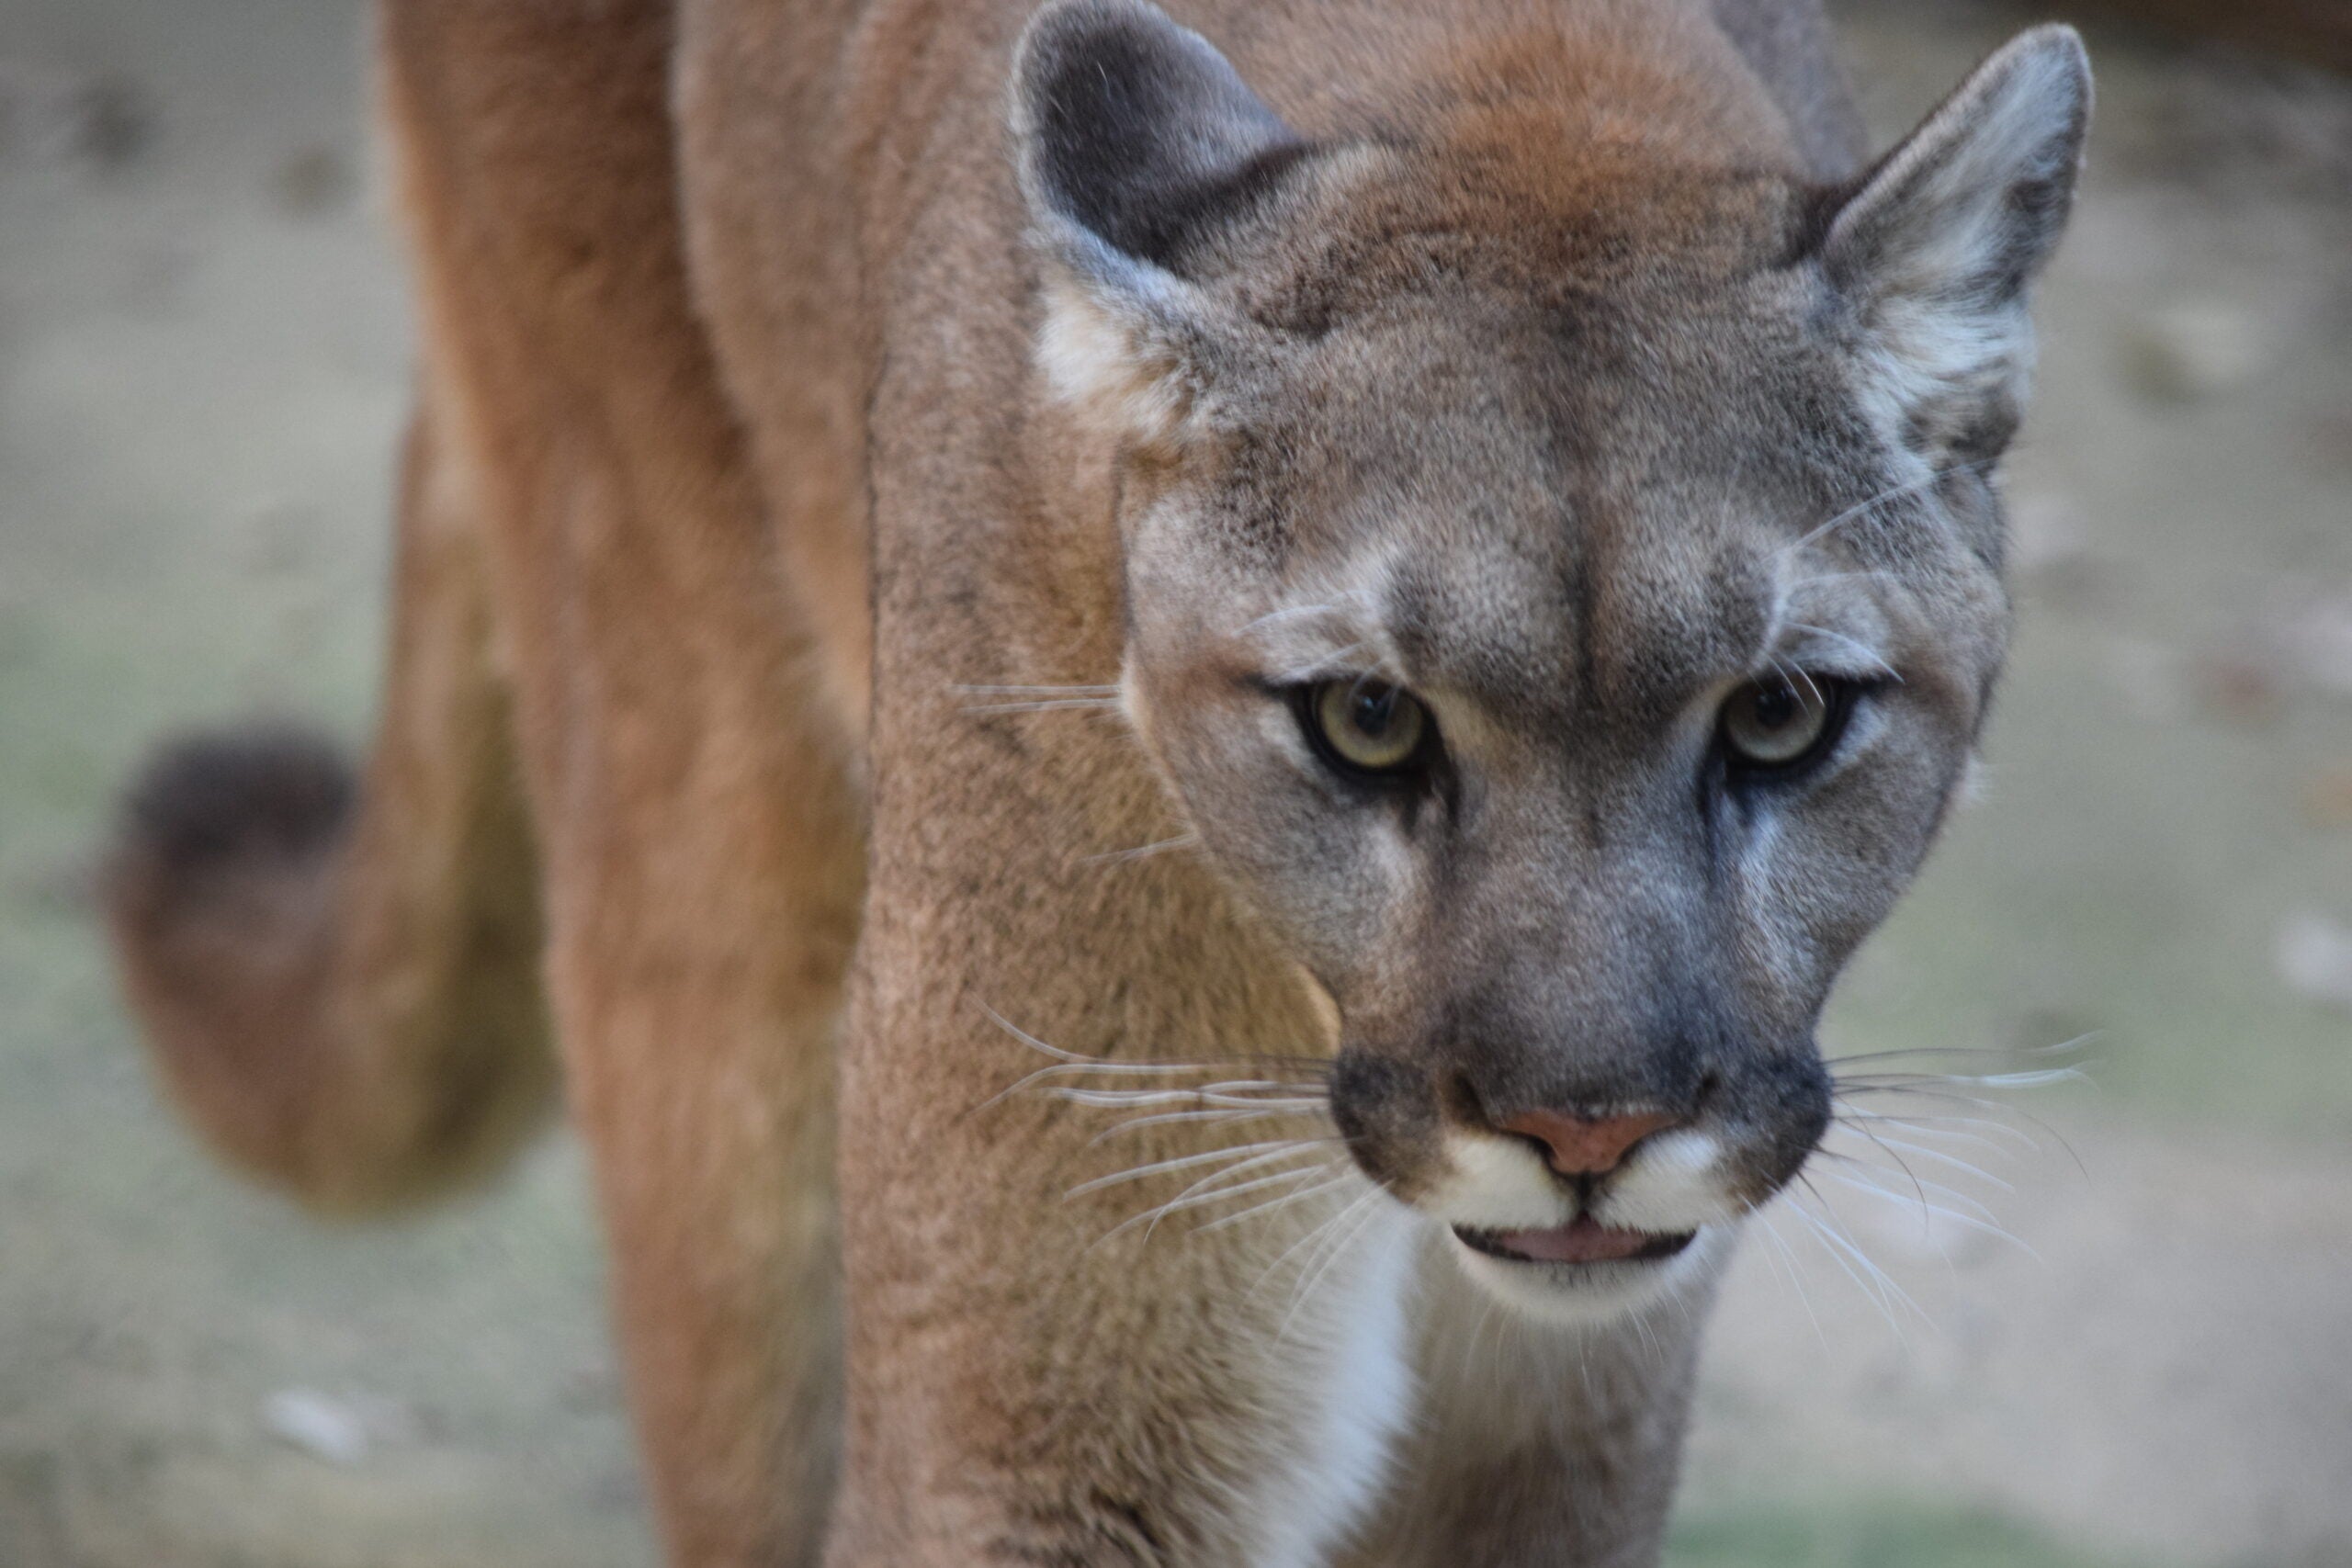 Cougar Attacks Young Girl in Washington State